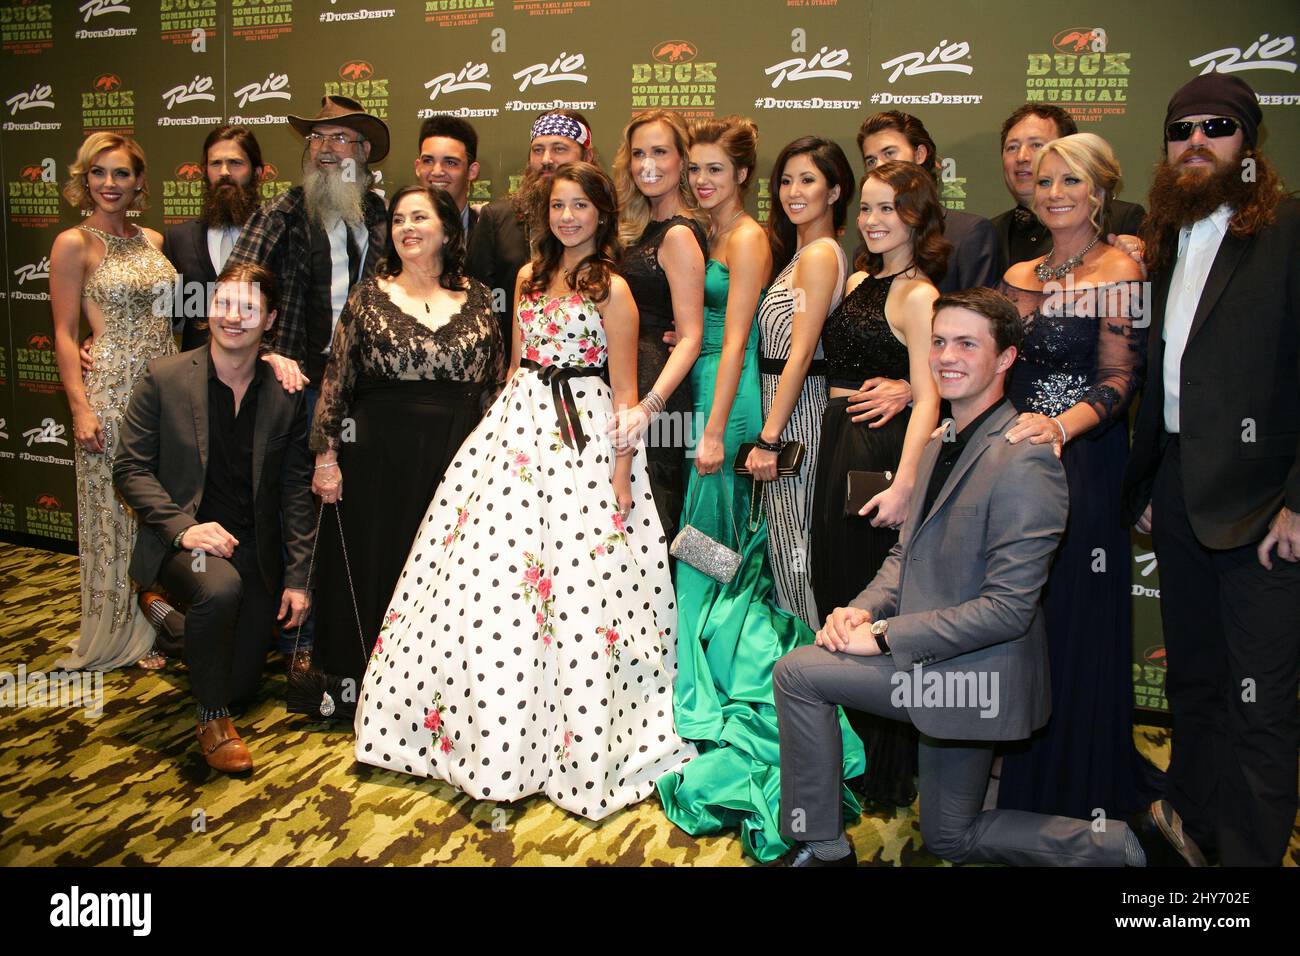 Jessica Robertson, Jep Robertson, Reed Robertson, Si Robertson, Kay Robertson, Will Robertson, Willie Robertson, Bella Robertson, Korie Robertson, Sadie Robertson, Rebecca Robertson, Mary Kate McEacharn, John Luke Robertson, Cole Robertson, Alan Robertson, Lisa Robertson, Jase Robertson attends the opening night of Duck Commander The Musical at the Crown theater at Rio All-Suite Hotel & Casino on April 15, 2015 in Las Vegas, Nevada. Stock Photo